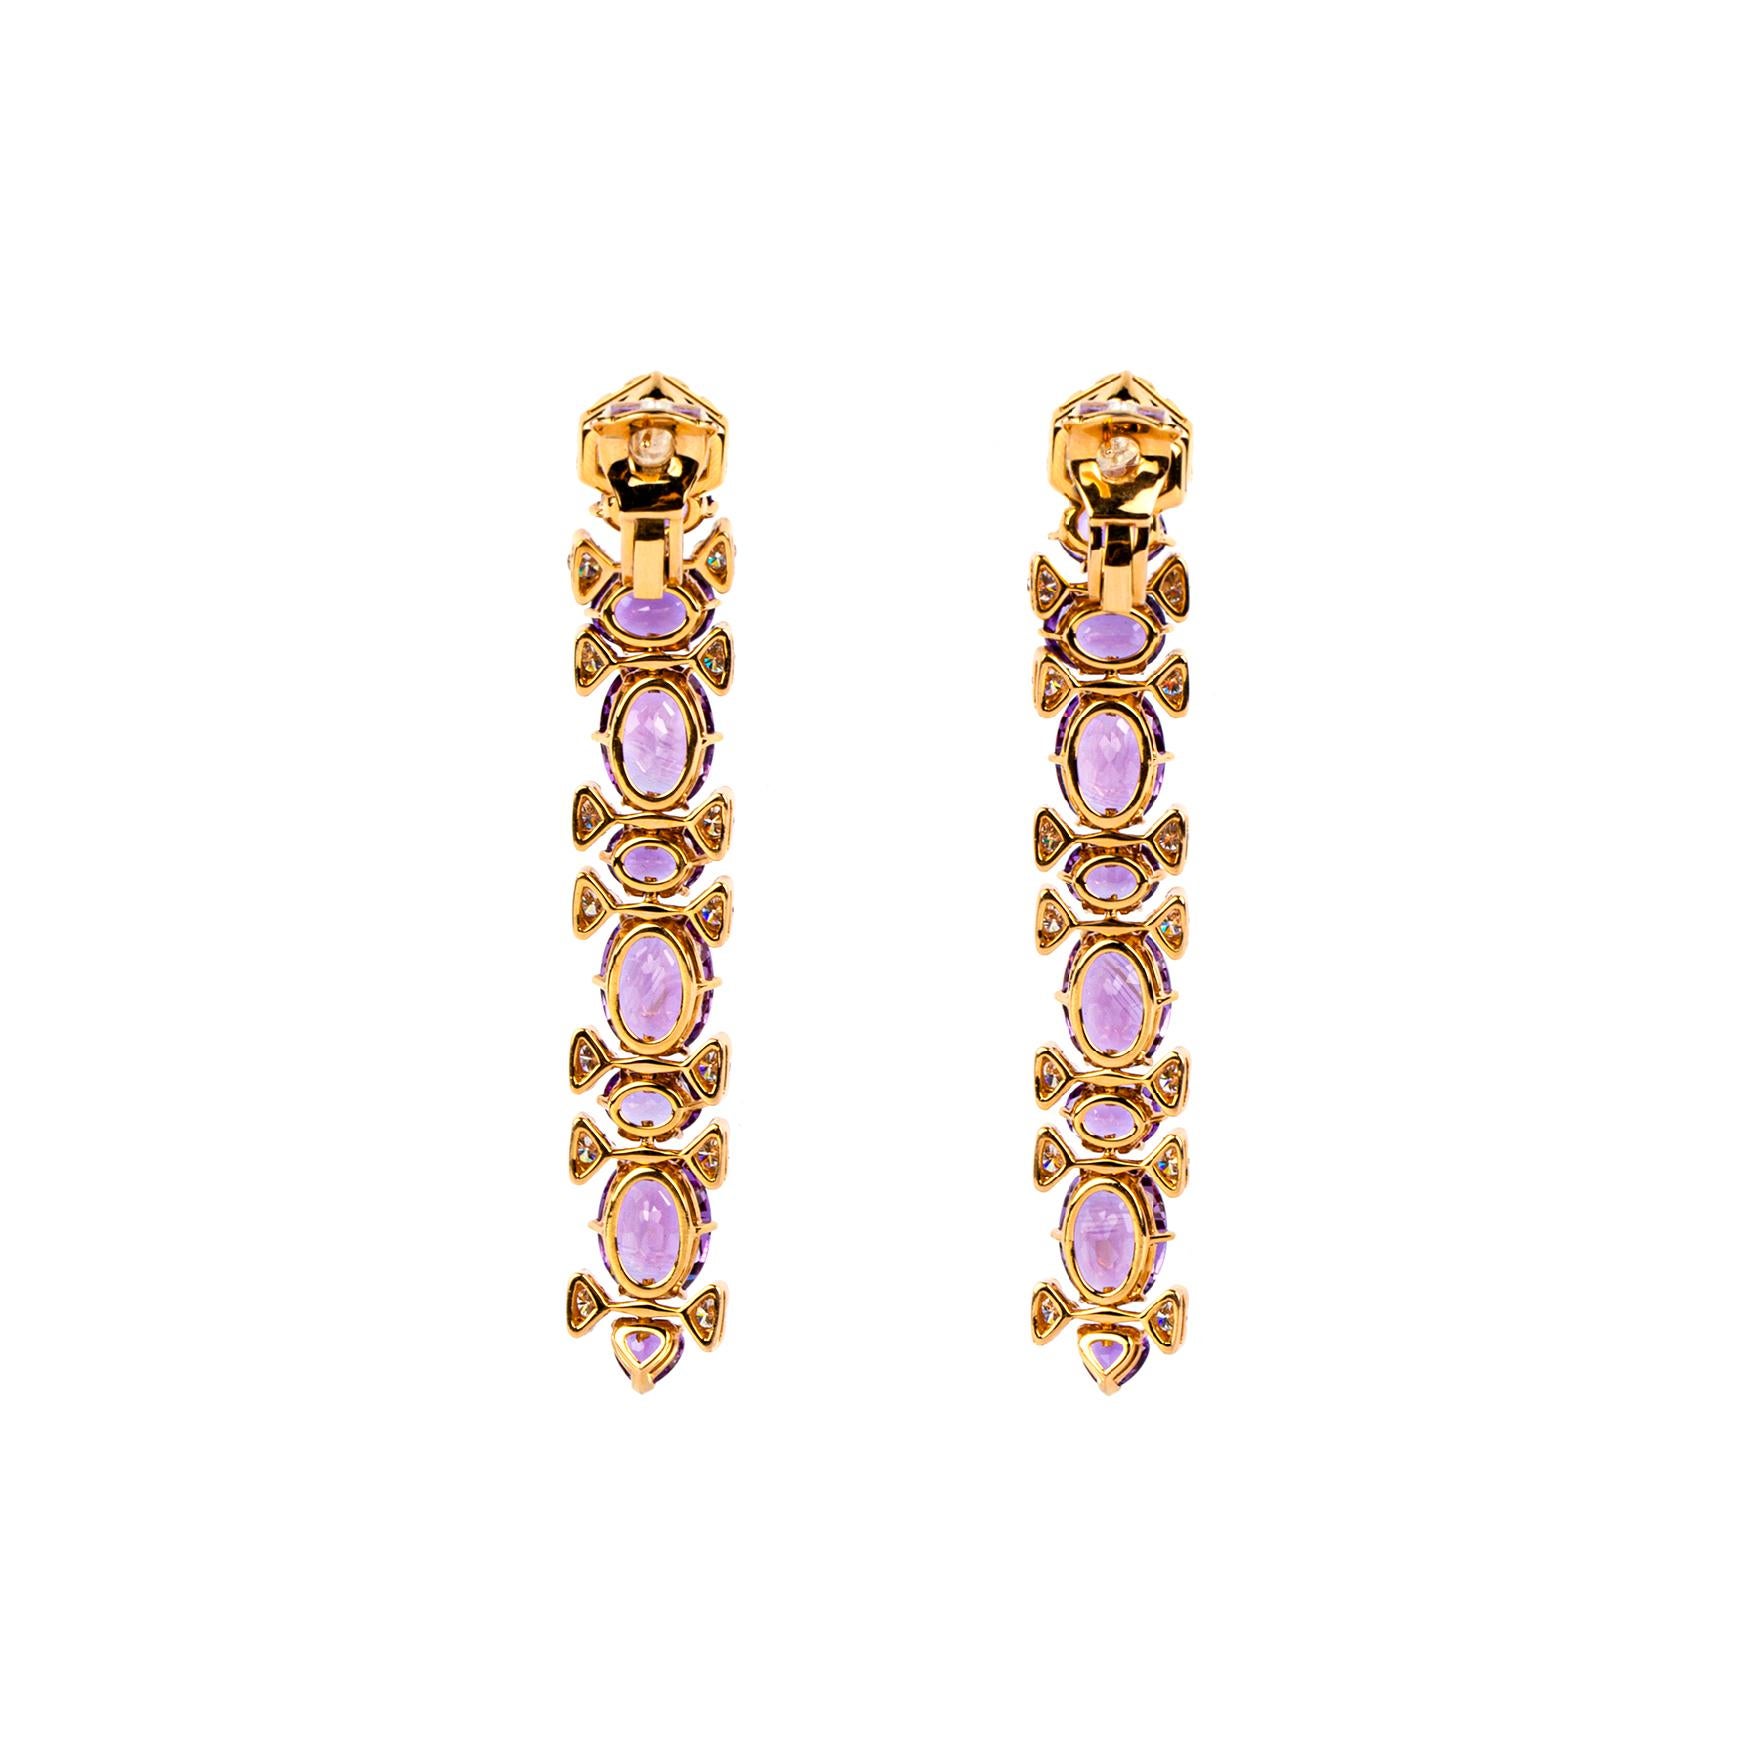 Mixed Cut Marina B Diamond and Amethyst Floral Earrings For Sale